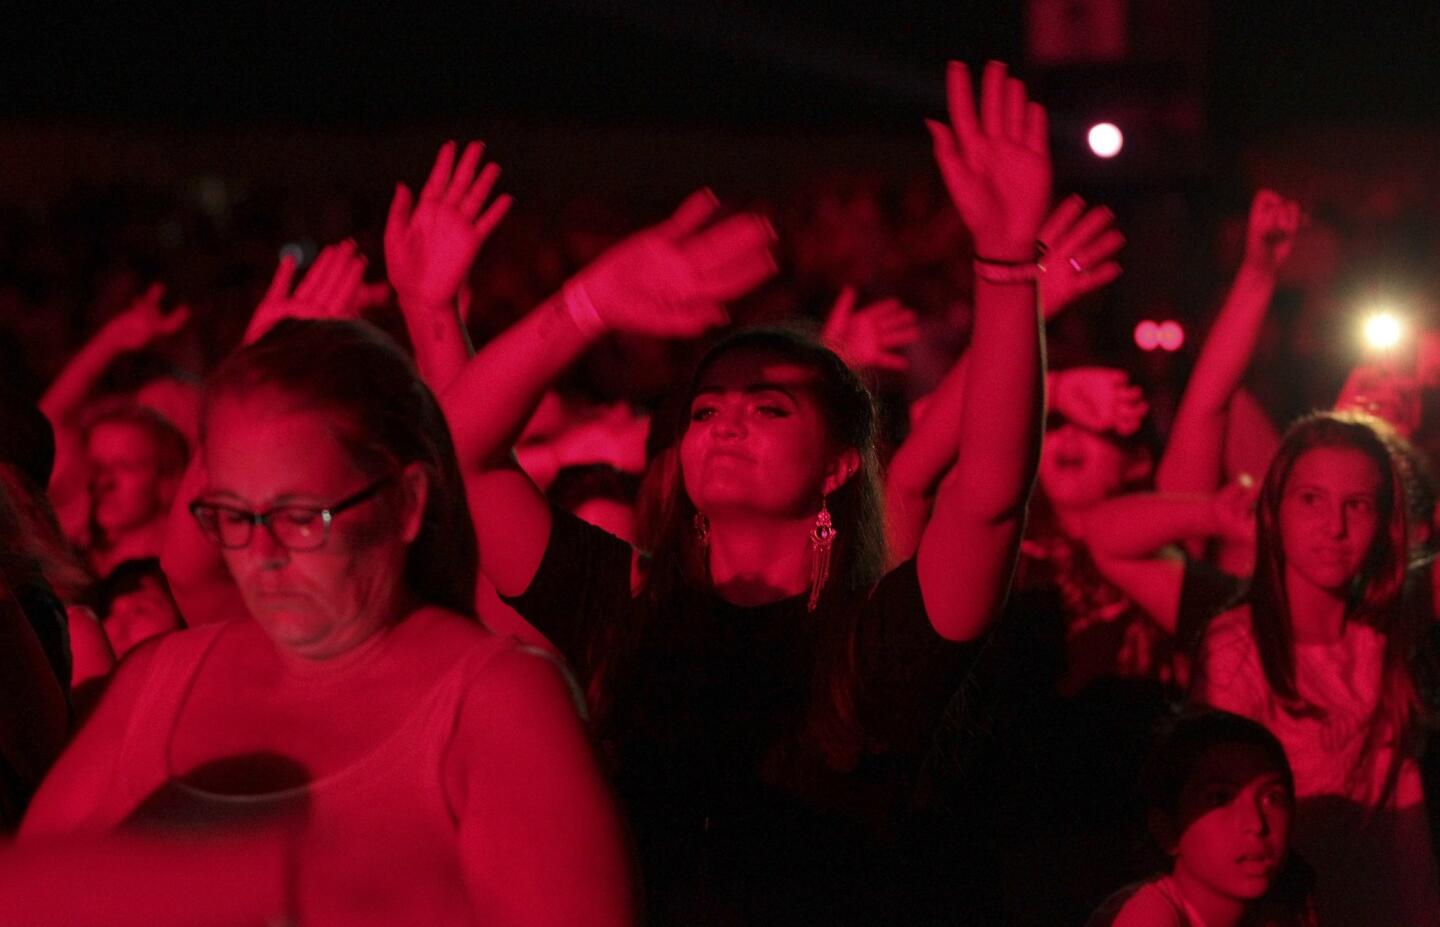 Fans sway their arms as they watch Nick Jonas perform.